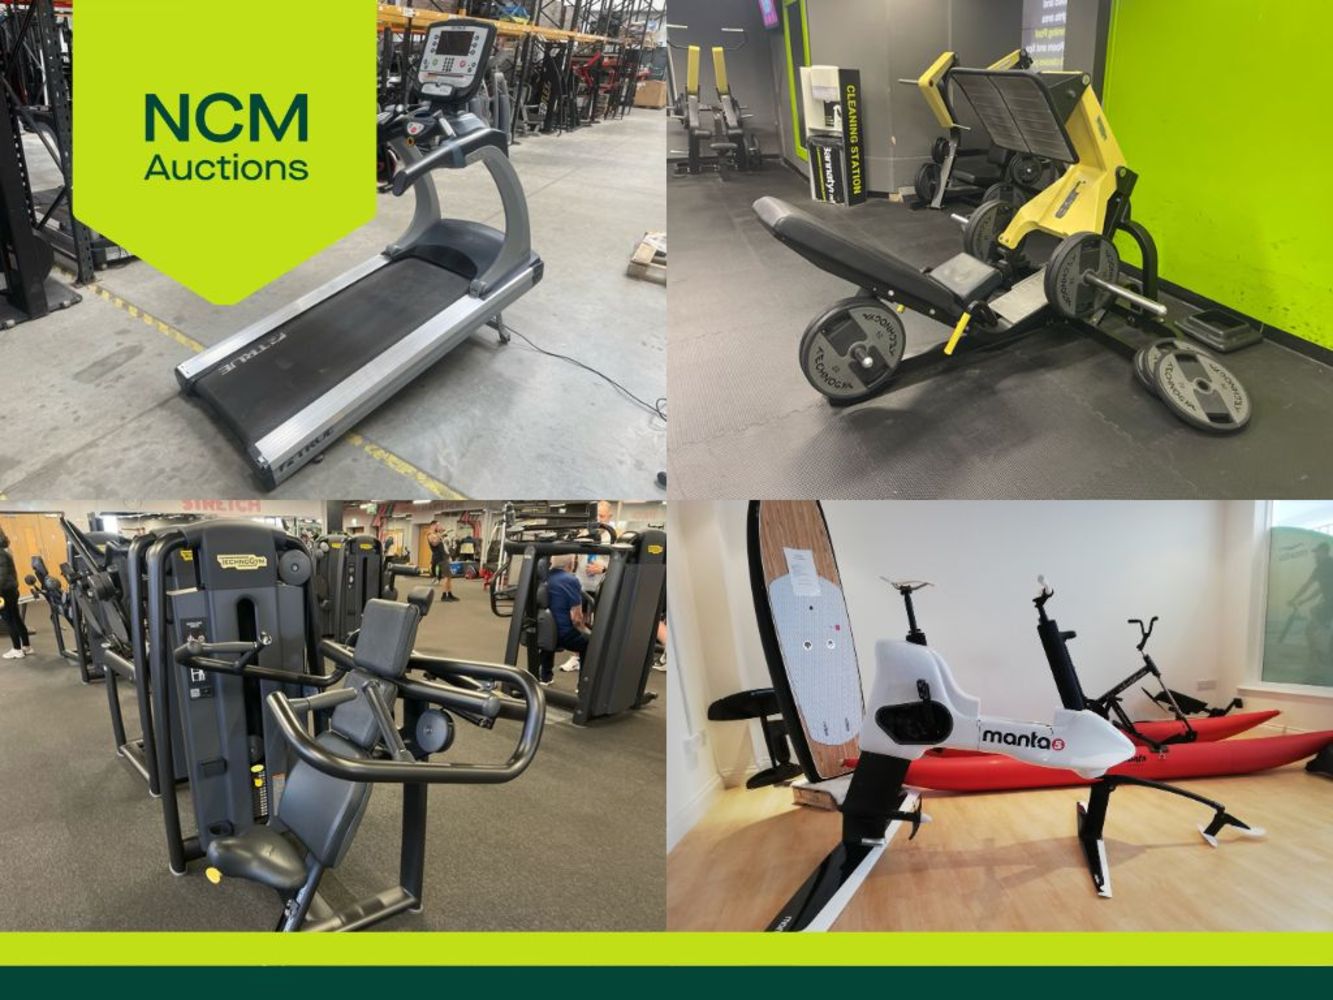 MAINLY NO RESERVE - Exercise Equipment - To Include Steppers, Shoulder Press, Cross Trainers, Chest Press, Leg Press, Treadmills,& More